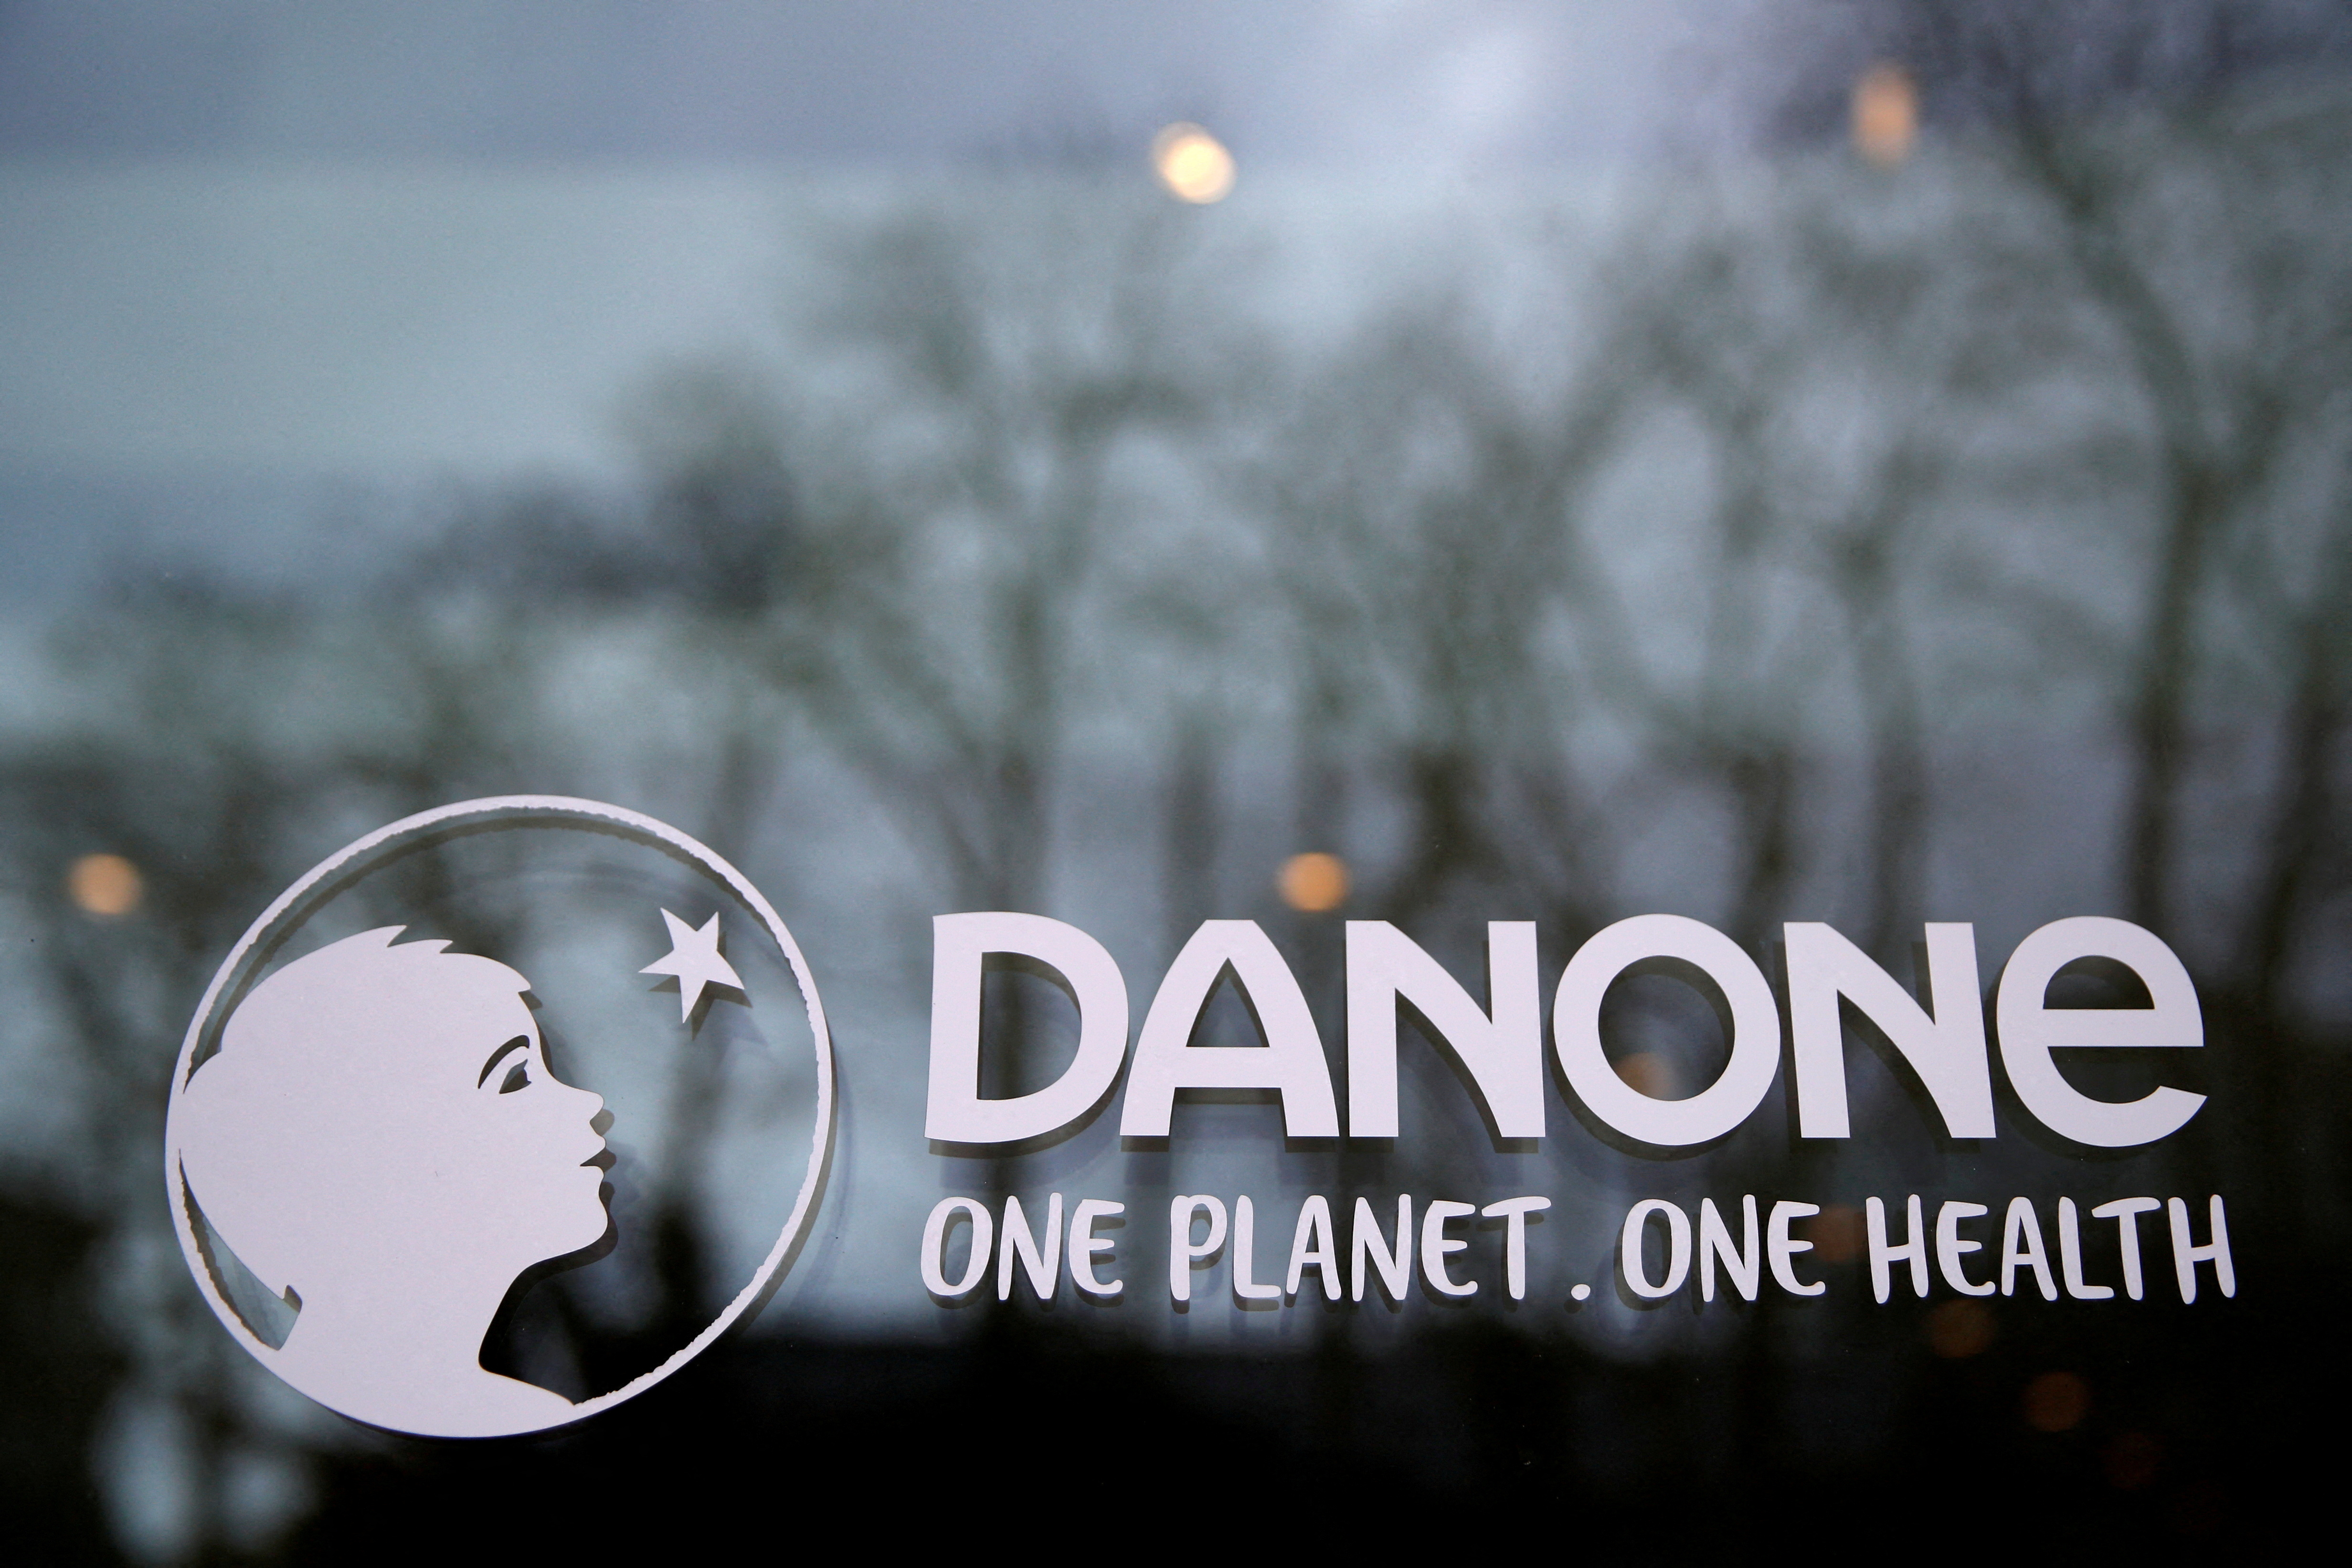 Danone is being taken to court by ClientEarth and two other environmental groups over its global plastic pollution